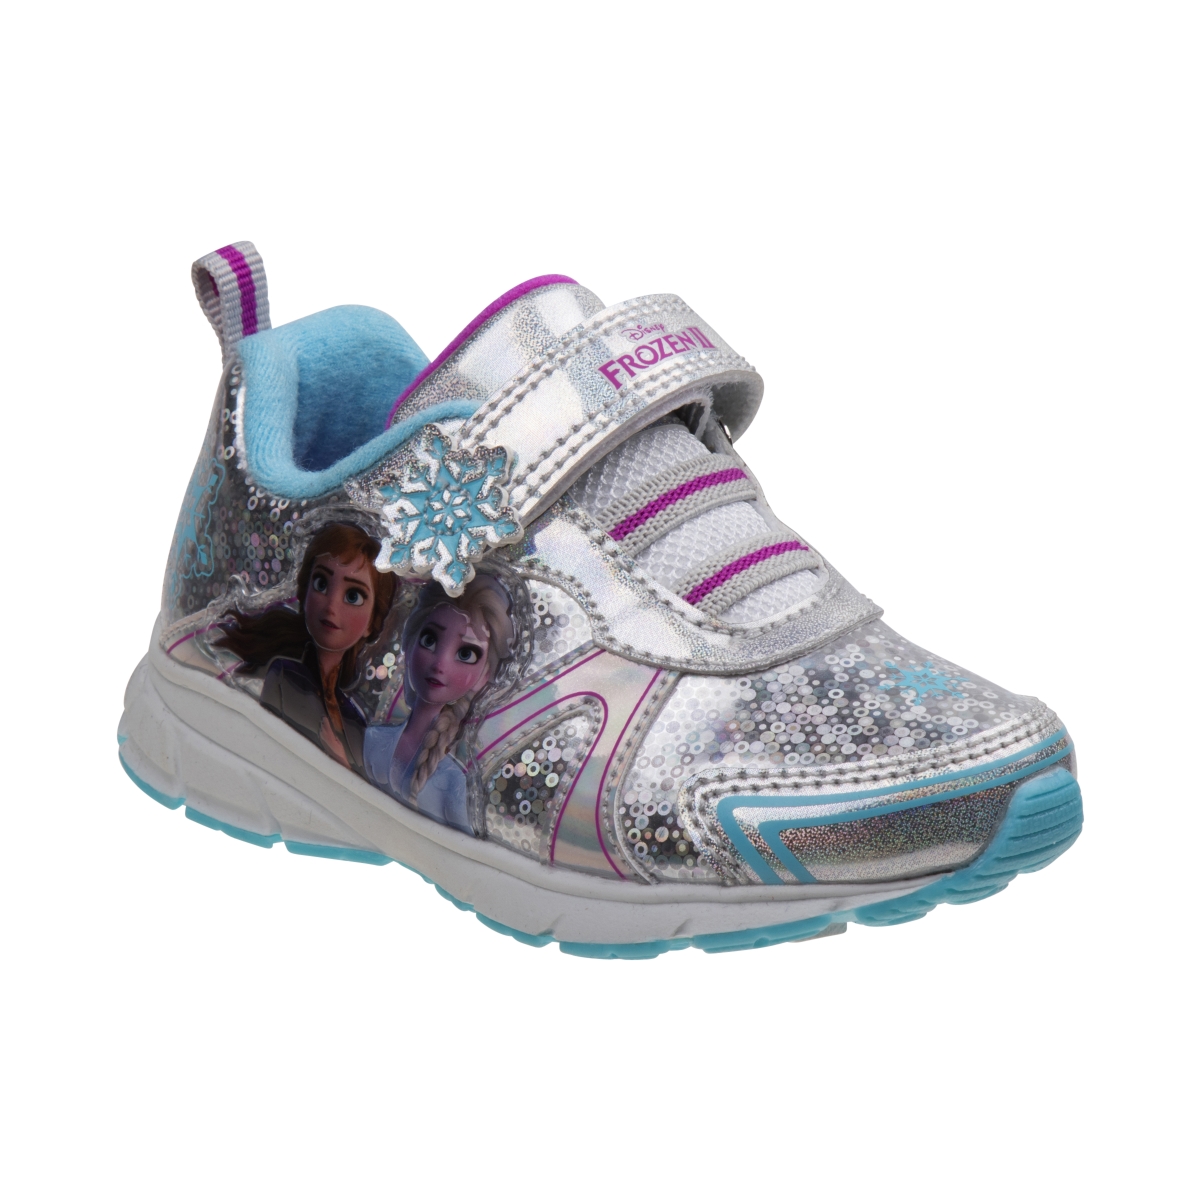 O-ch18660 Disney Girl Frozen Sneakers For Toddlers Girls, Silver & Blue - Size 7 To 10